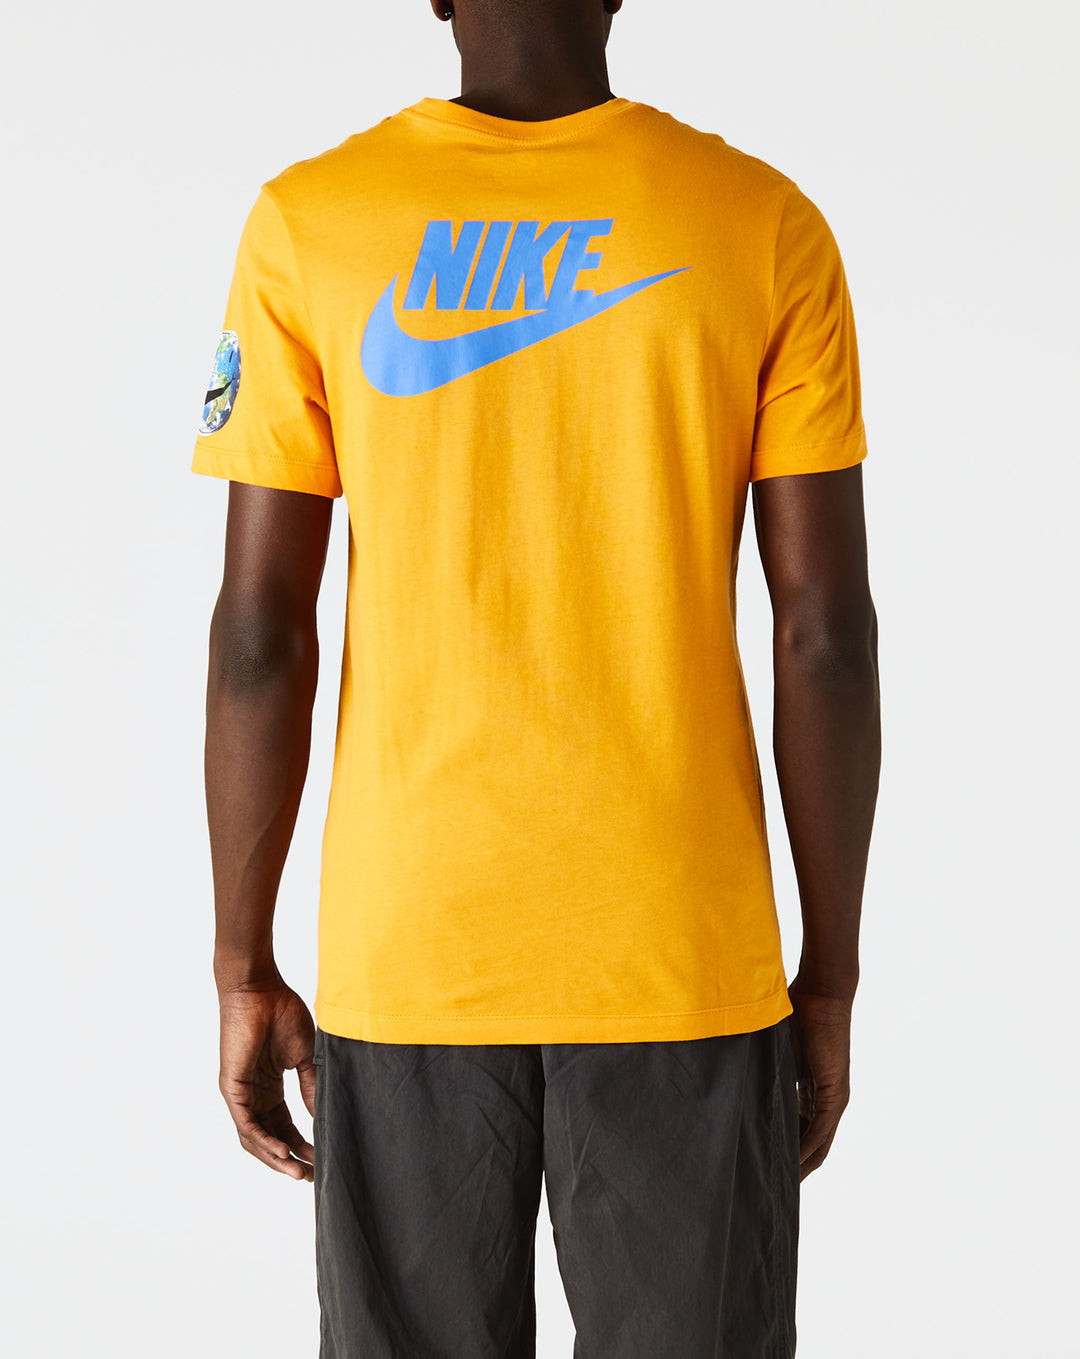 Nike Have A Nike Day T-Shirt  - XHIBITION